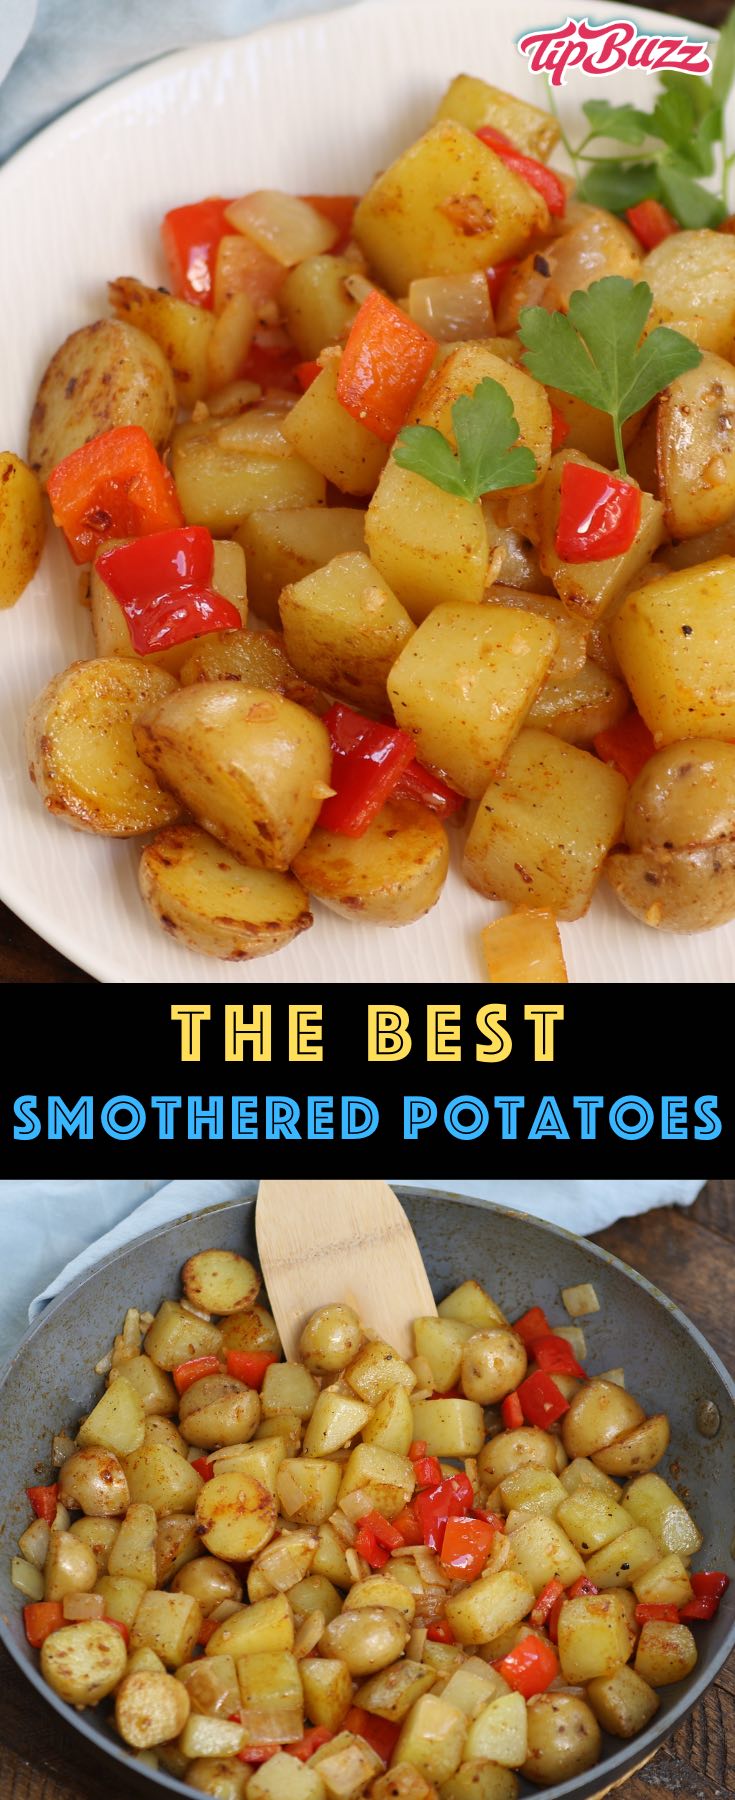 Southern Smothered Potatoes are a mouthwatering side dish you an easily prepare on the stovetop with onions, garlic, bell peppers and cajun seasoning. Or add some sausage or cheese for some heartier comfort food! #smotheredpotatoes